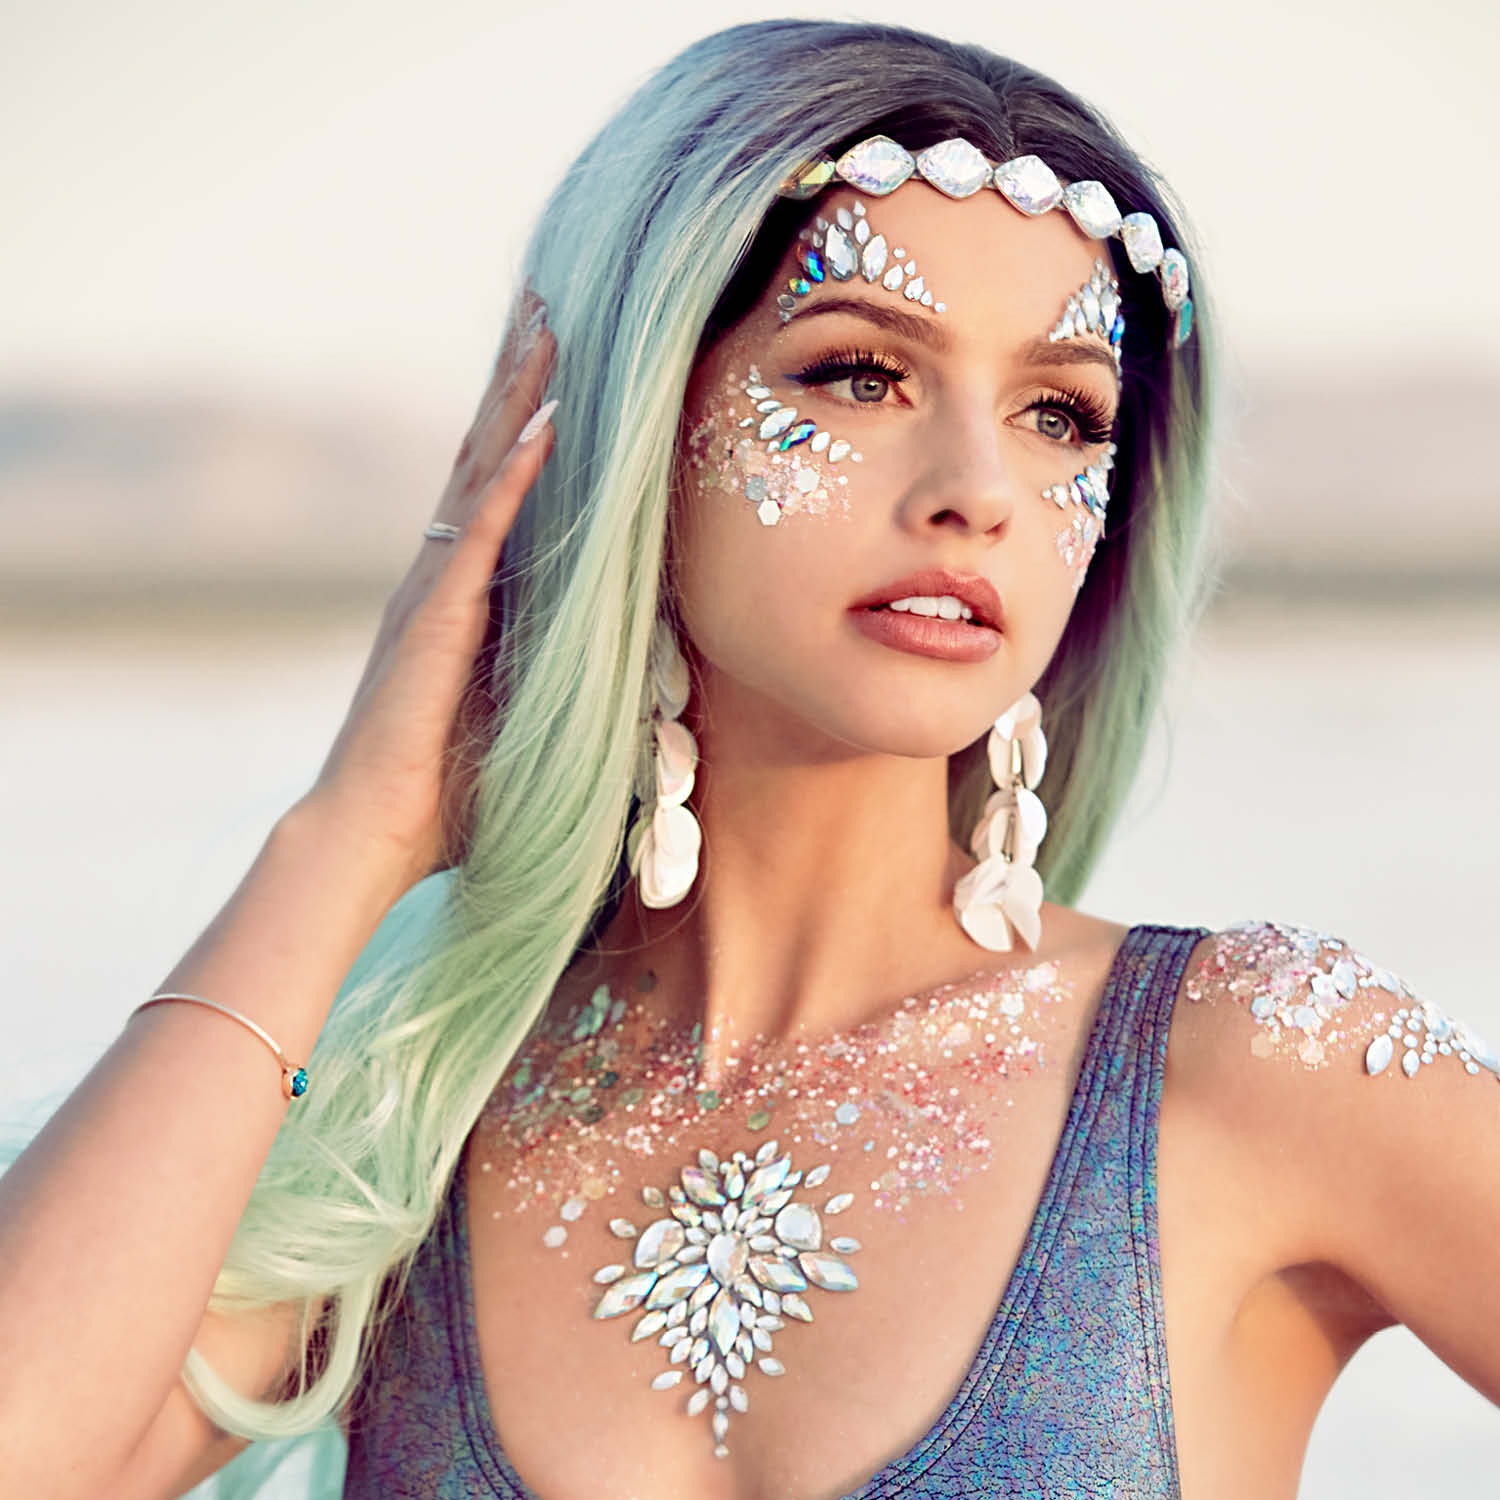 Get the Mermaid look with @marooshk - Claire's Icing Blog